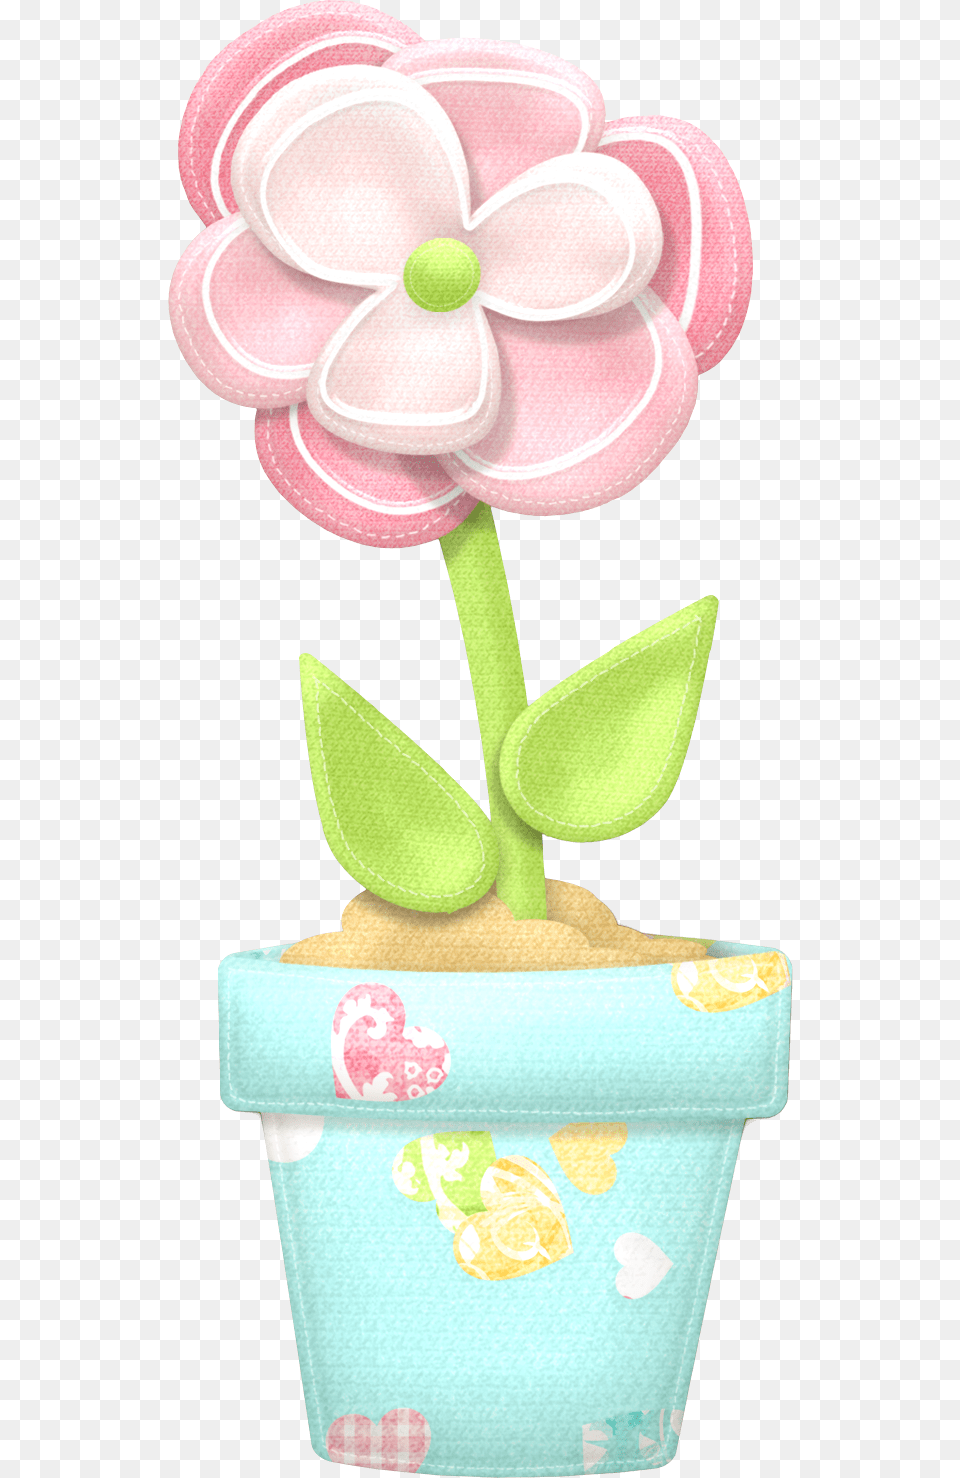 Pastel Colorful Flower Clipart, Dessert, Food, Cake, Cream Png